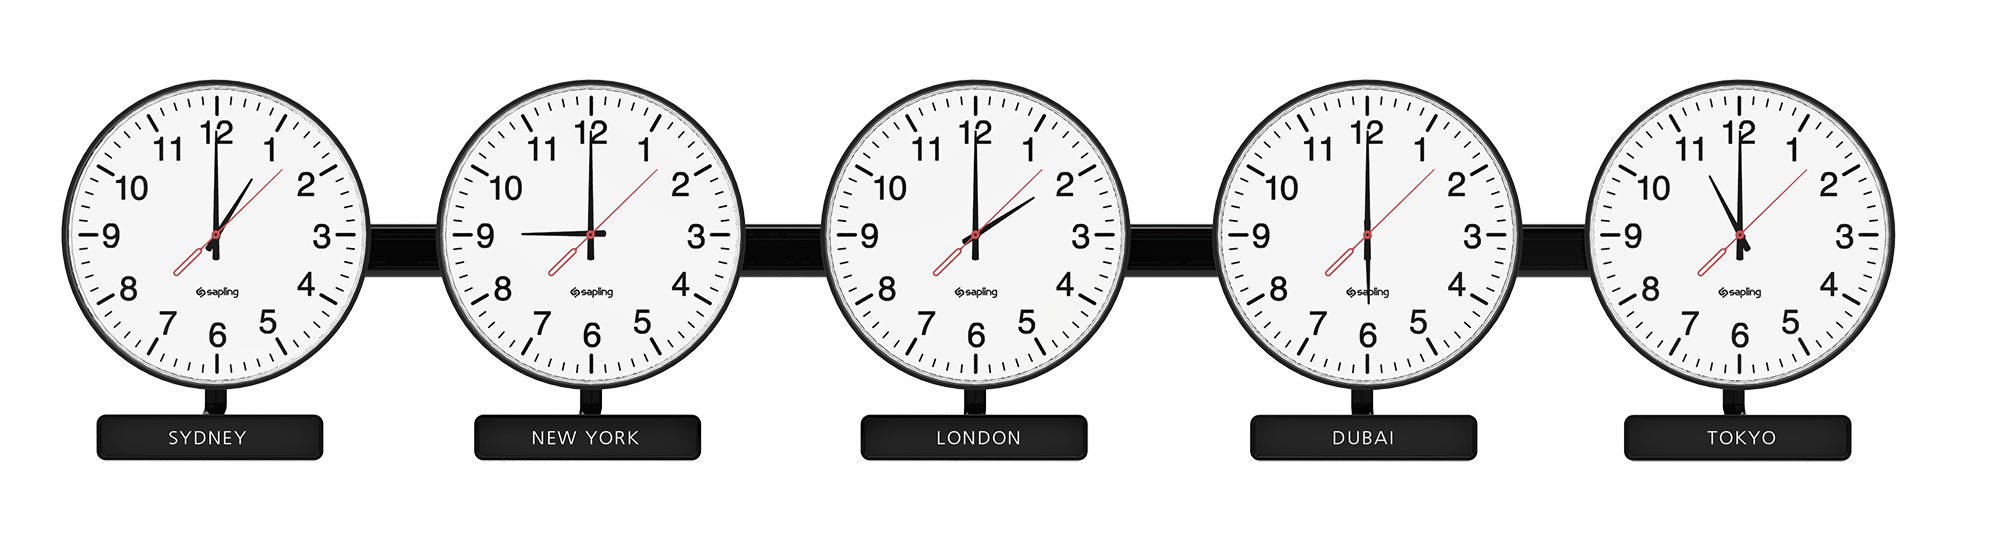 The Ultimate Guide to the Time Zone Clock – Part 3 - Sapling Clocks